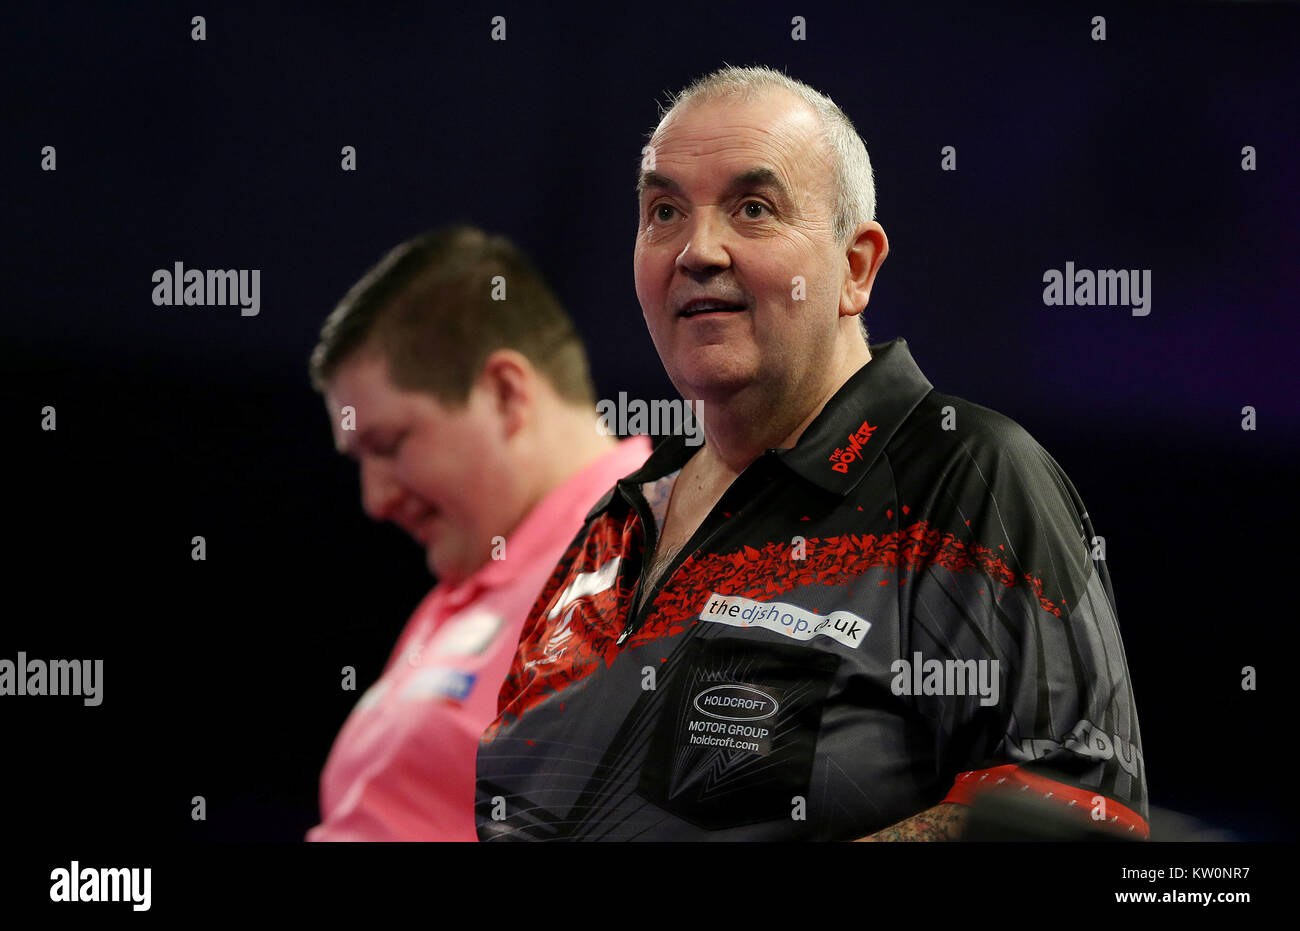 Phil Taylor during day twelve of the William Hill World Darts Championship at Alexandra Palace, London. PRESS ASSOCIATION Photo. Picture date: Thursday December 28, 2017. See PA story DARTS World. Photo credit should read: Steven Paston/PA Wire. Stock Photo